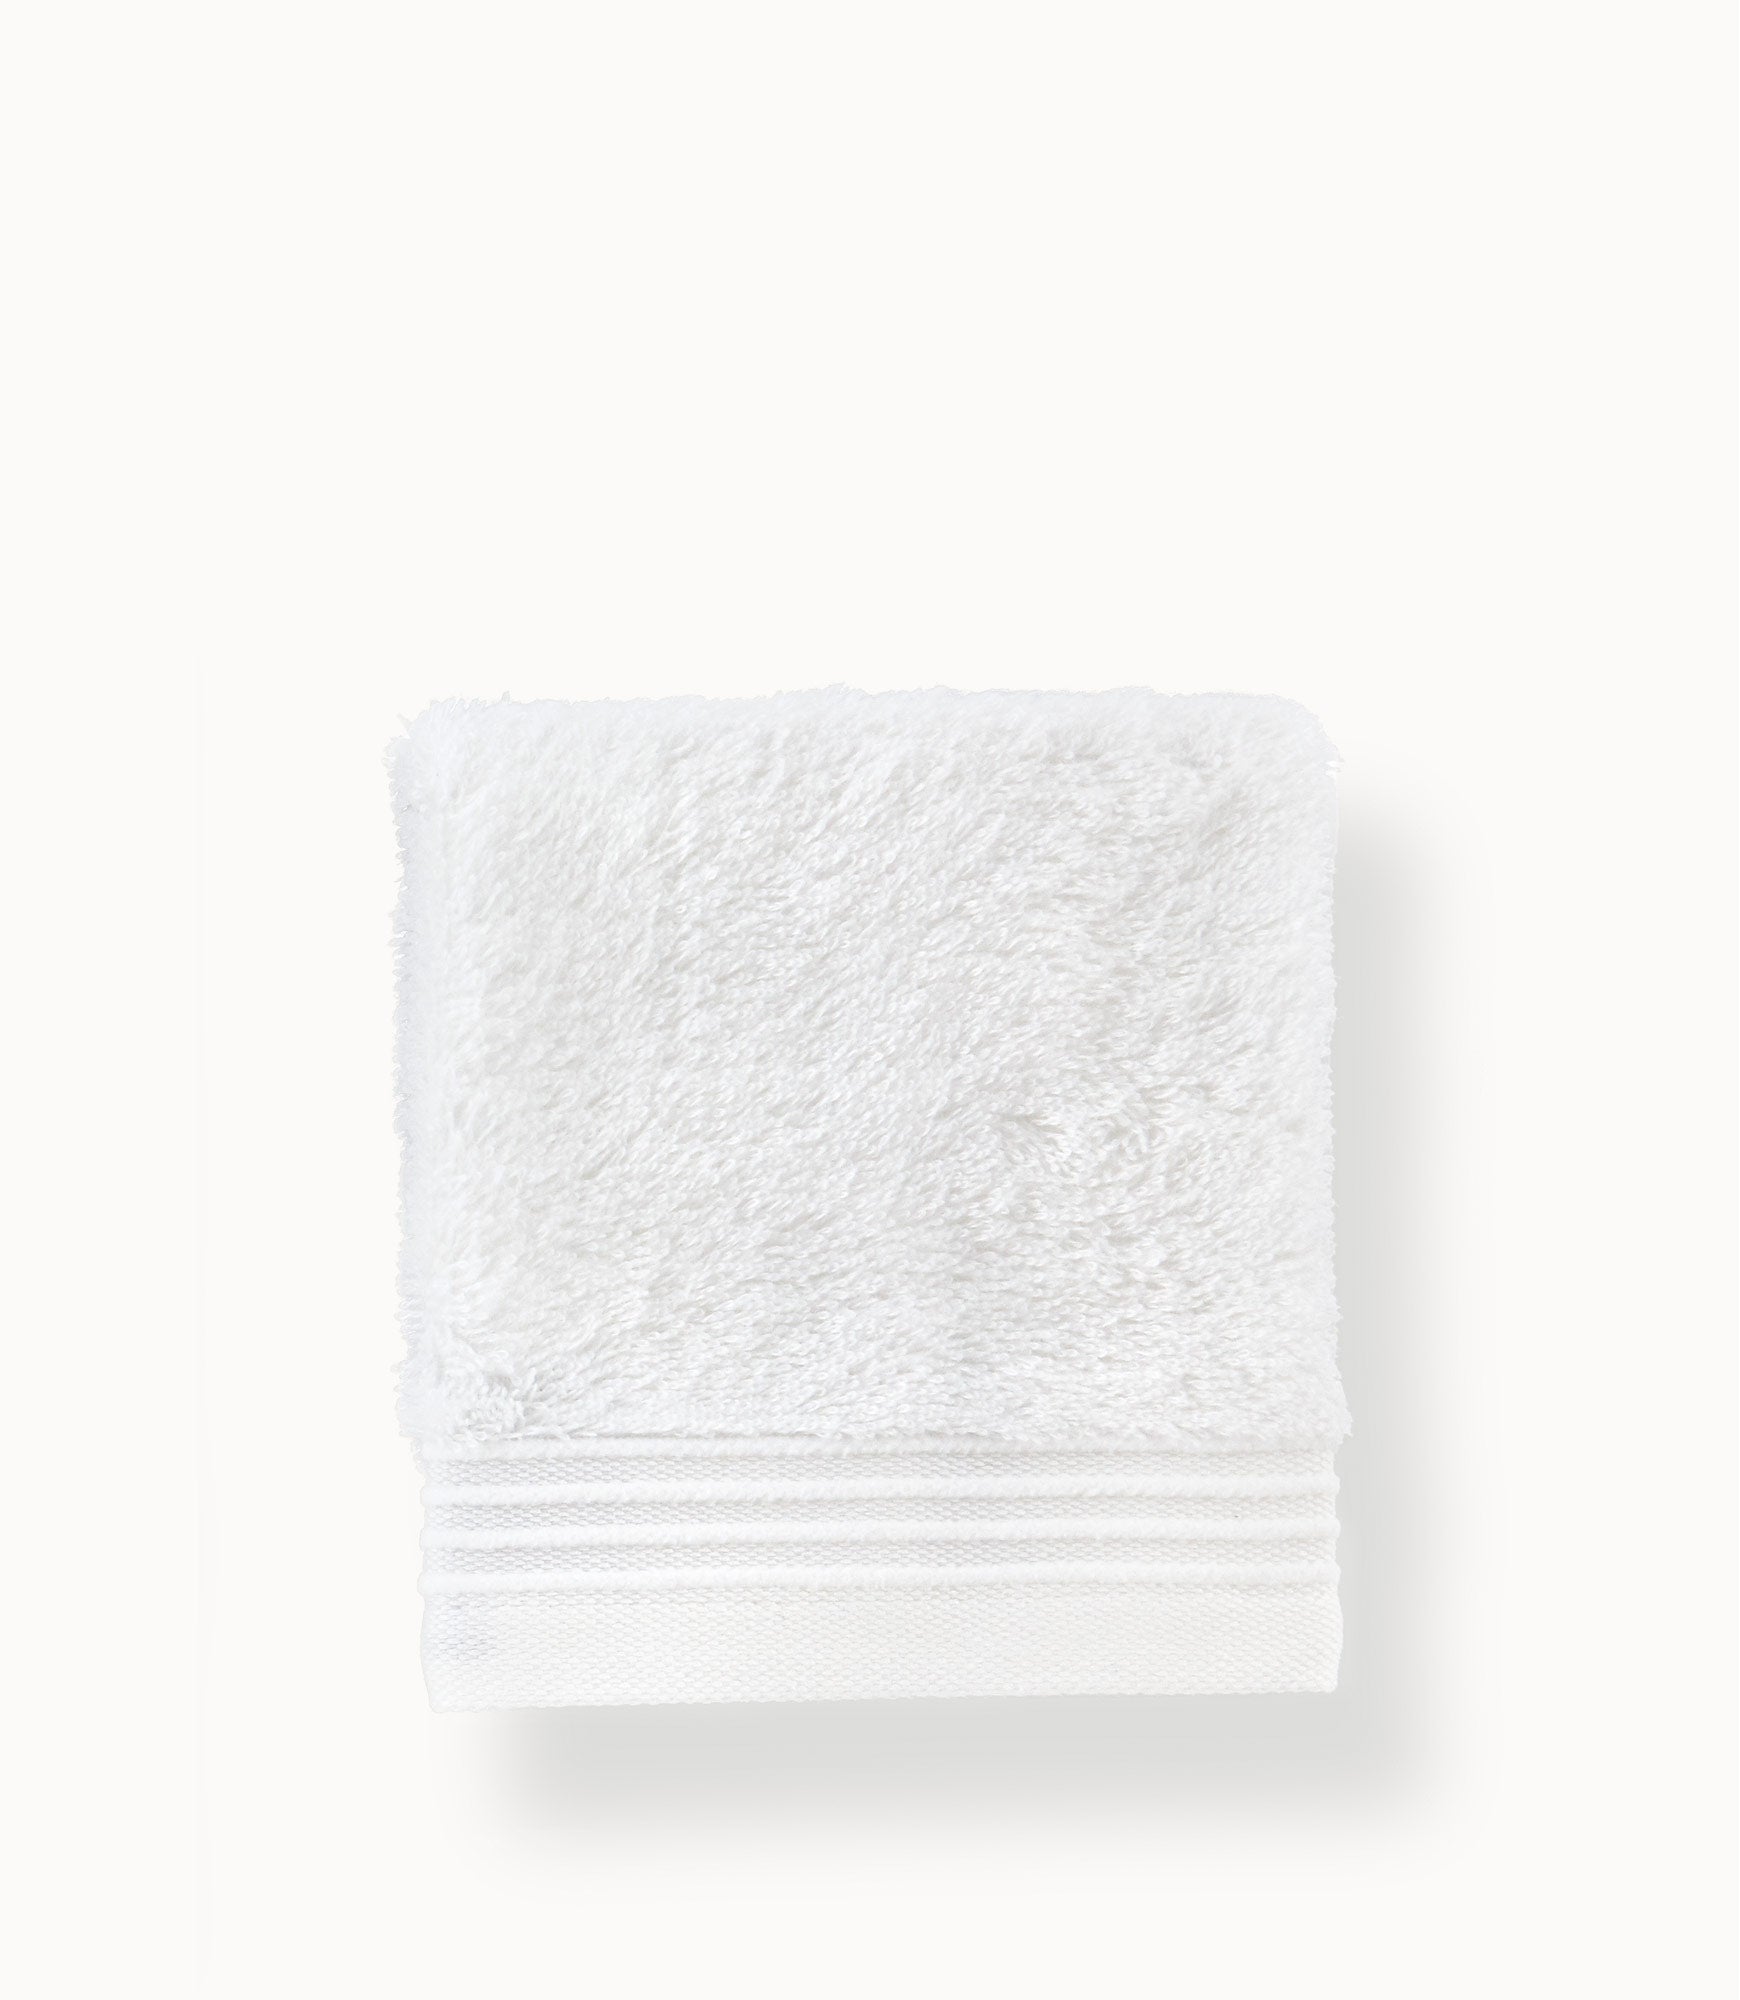 Bath Towel  Shop Towels, Robes and Bath & Body from The Peabody at Home